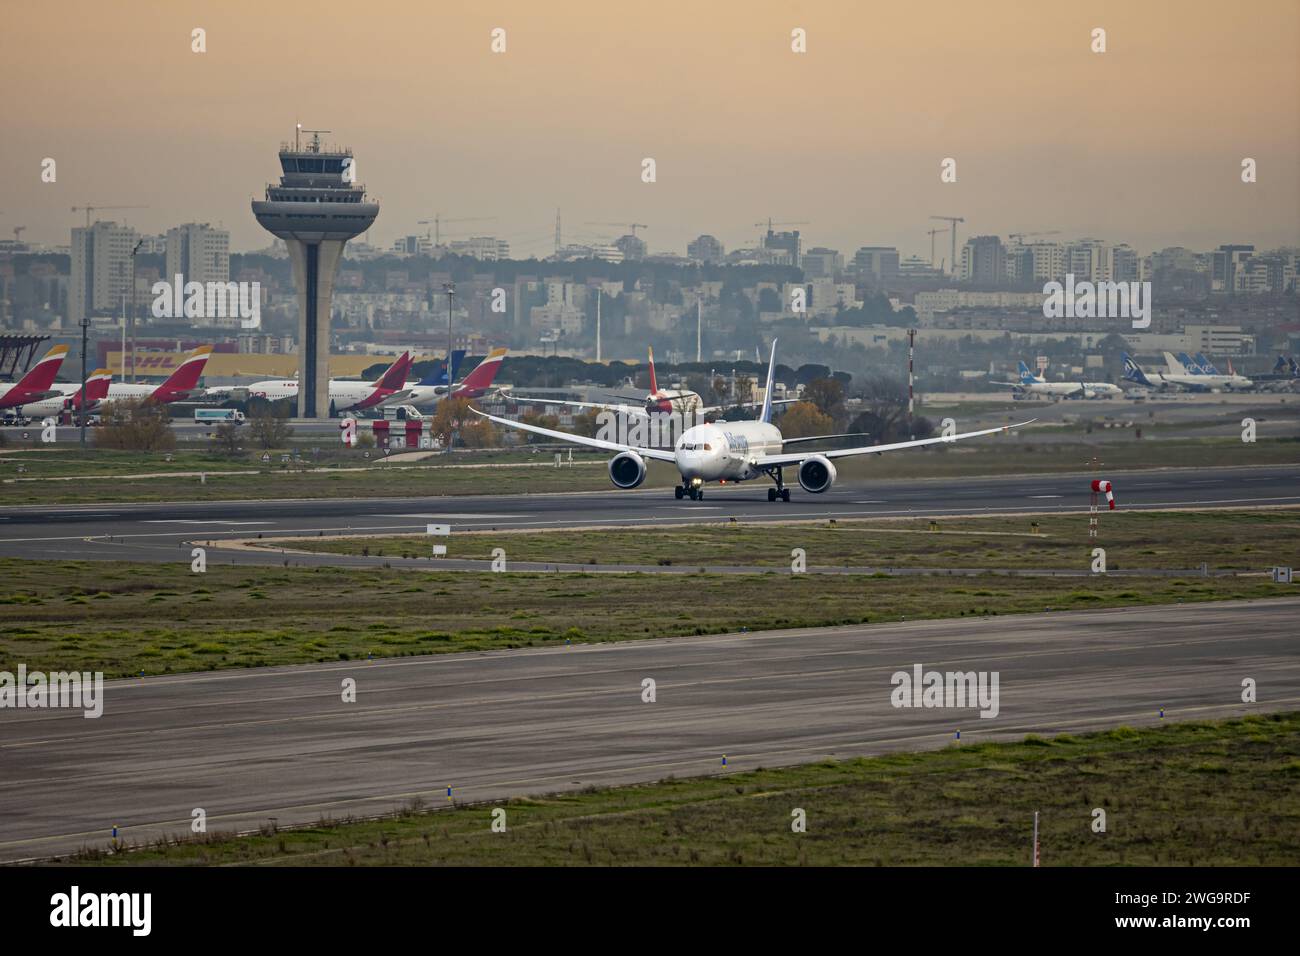 An airplane racing down the runway just before takeoff near the control tower Stock Photo